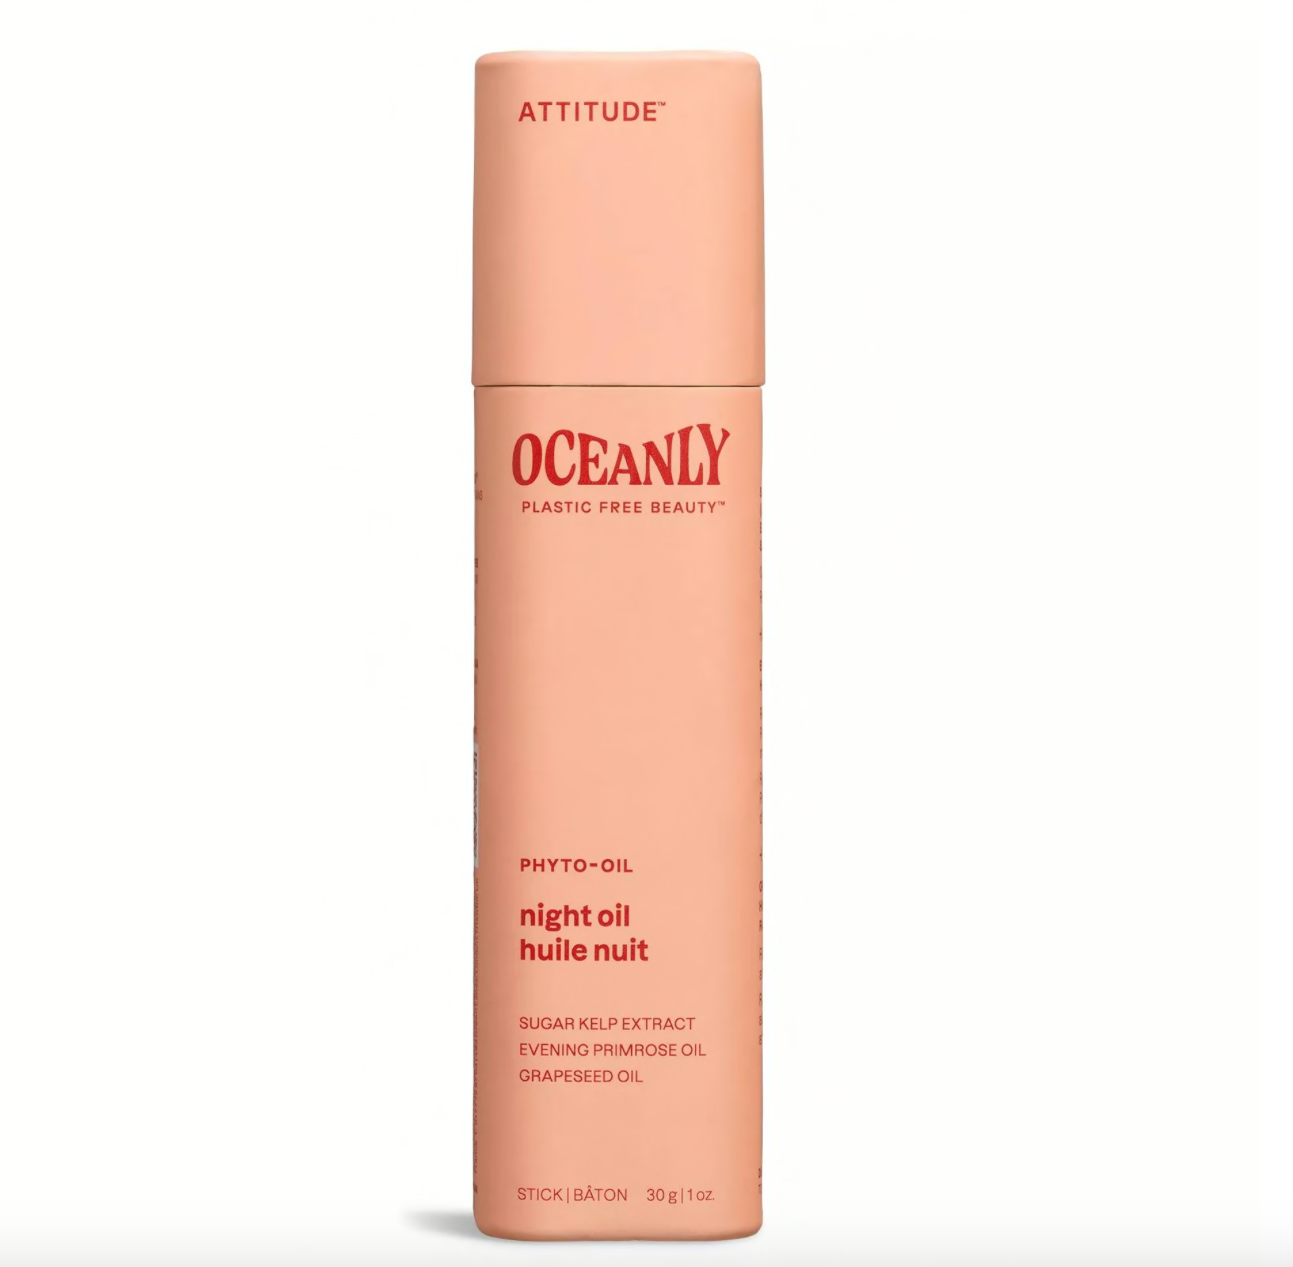 Nourishing Solid Night Oil with Evening Primrose Oil - Oceanly Phyto-Oil